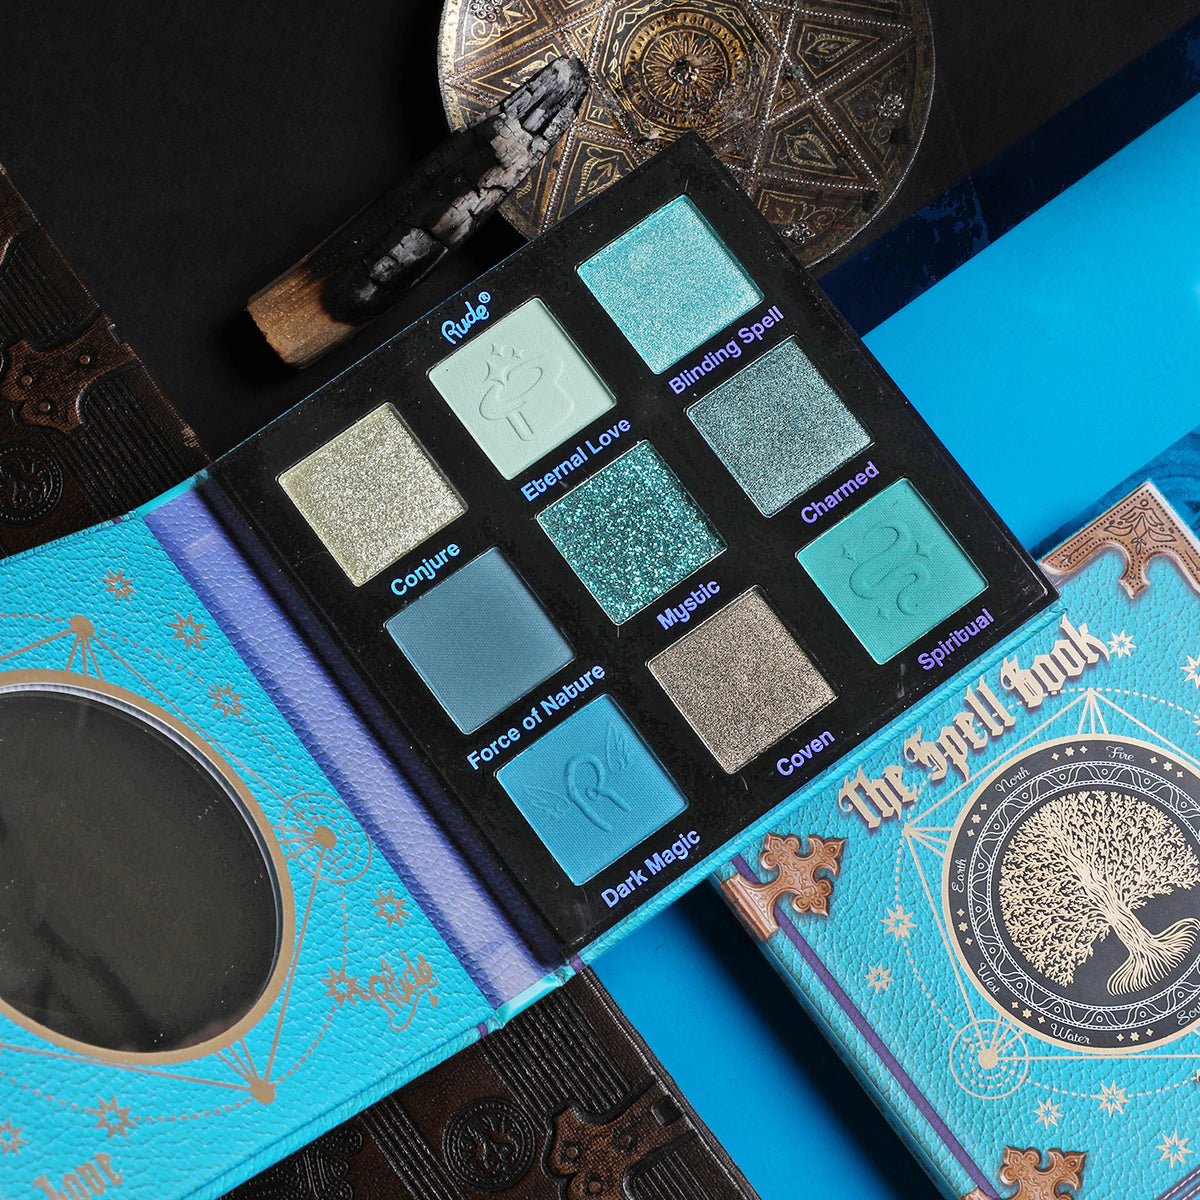 The Spell Book Palette